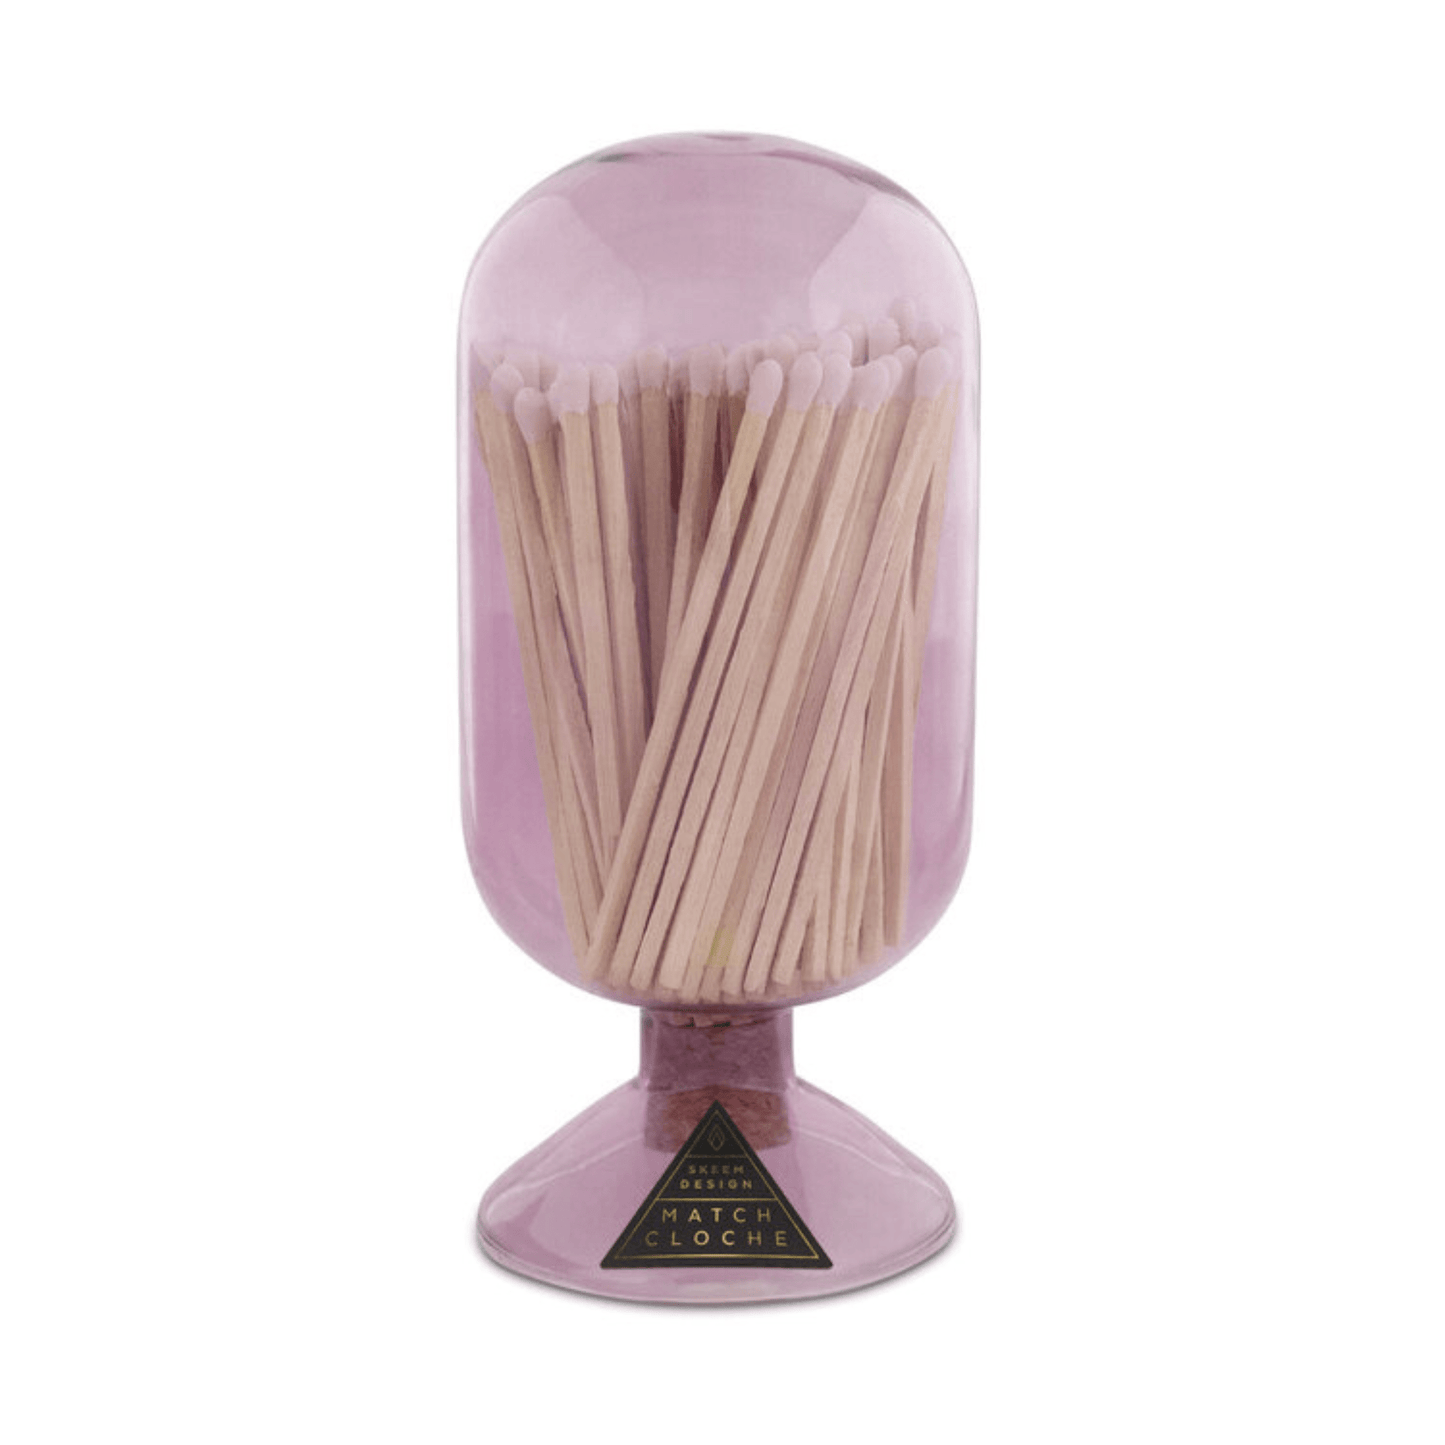 Primary Image of Violet Cloche Matches